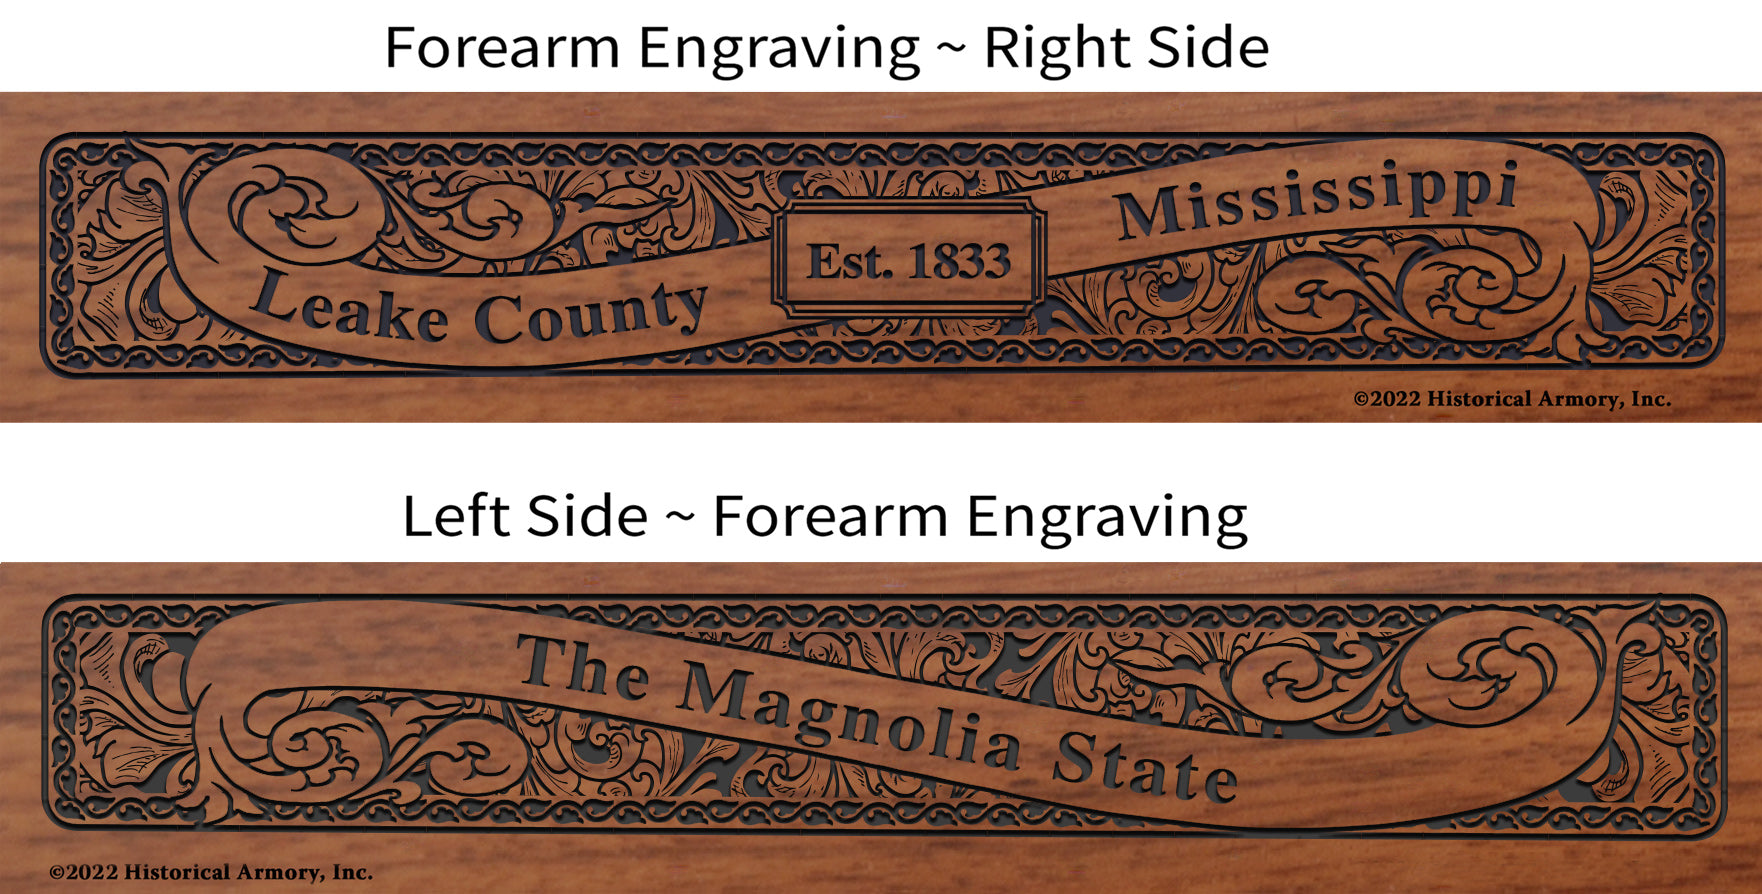 Leake County Mississippi Engraved Rifle Forearm